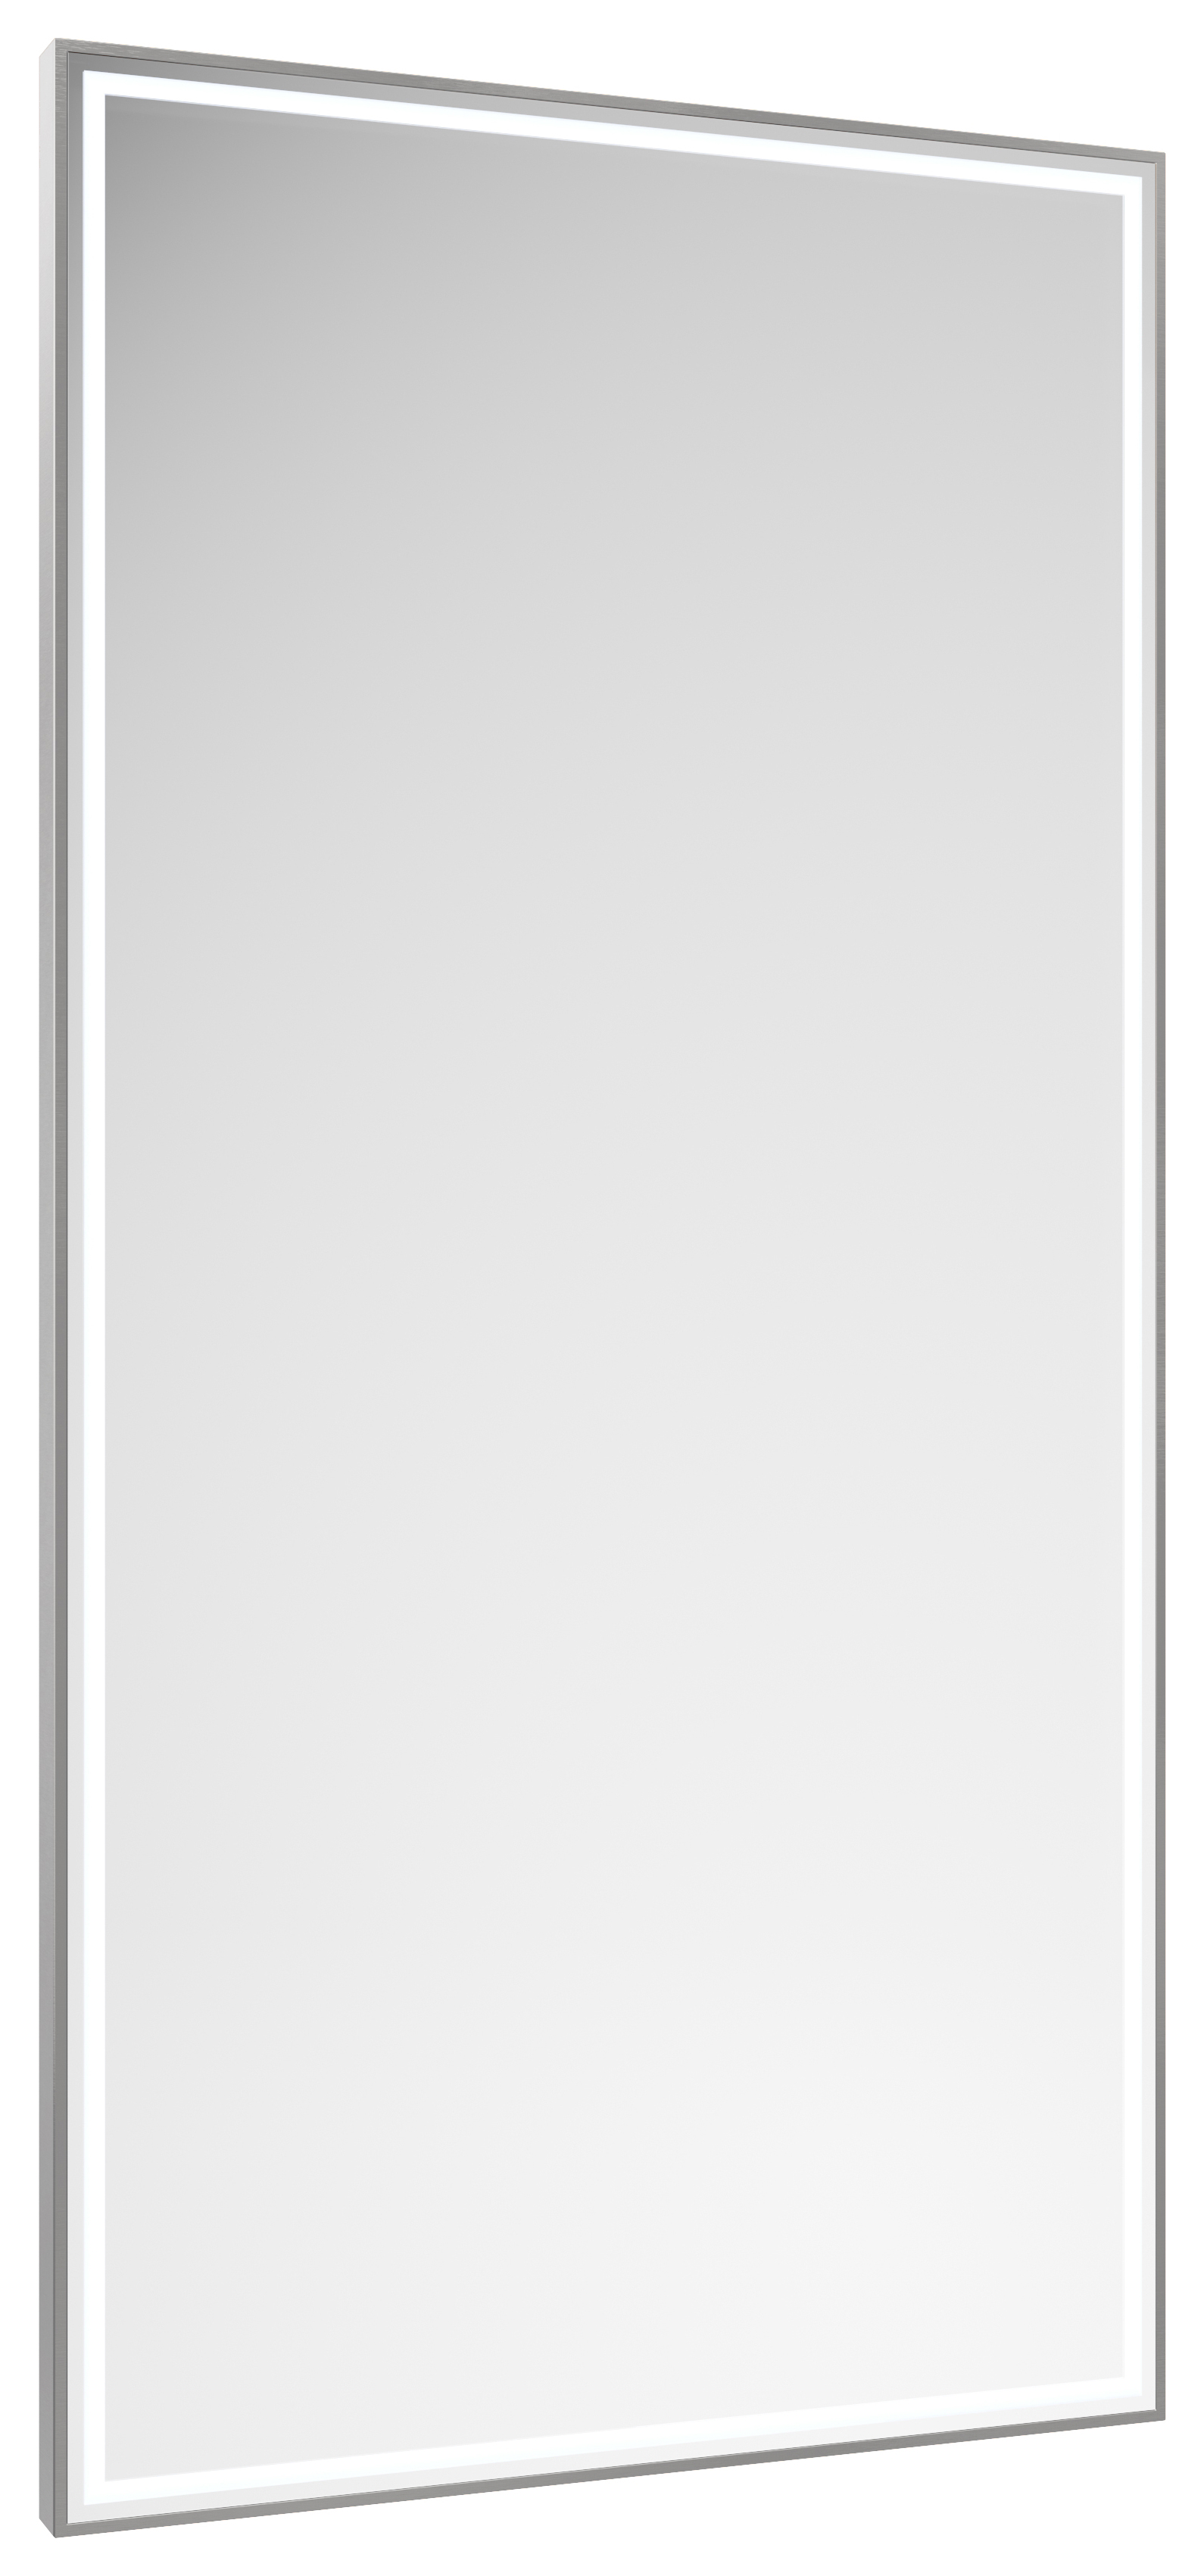 Image of Abacus Melford Silver LED Mirror with Demister - 800 x 500mm